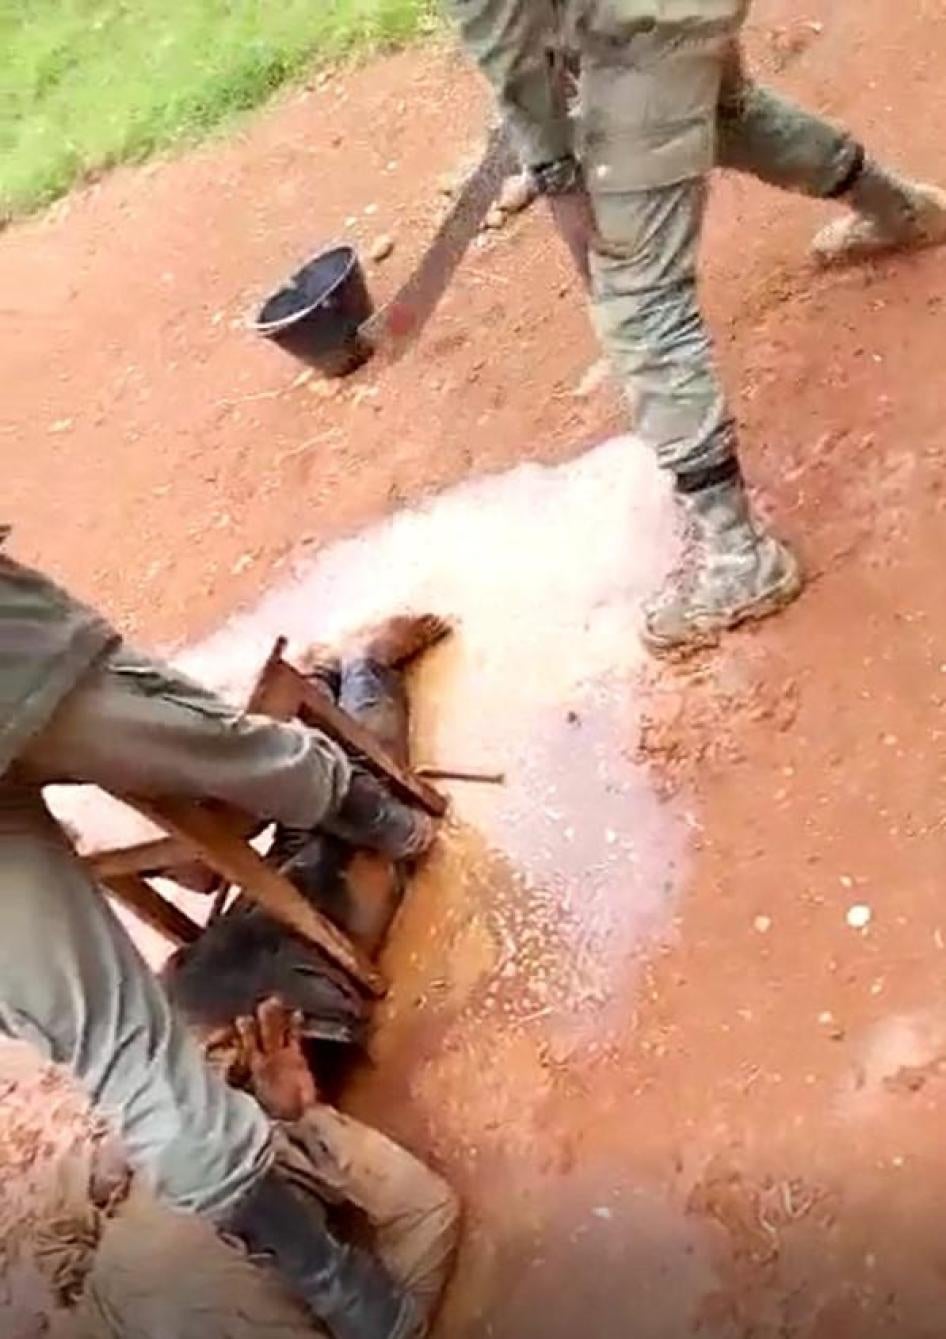 Image from a video of a suspected armed separatist being tortured by gendarmes in Cameroon’s South-West region during his arrest in May 2018.